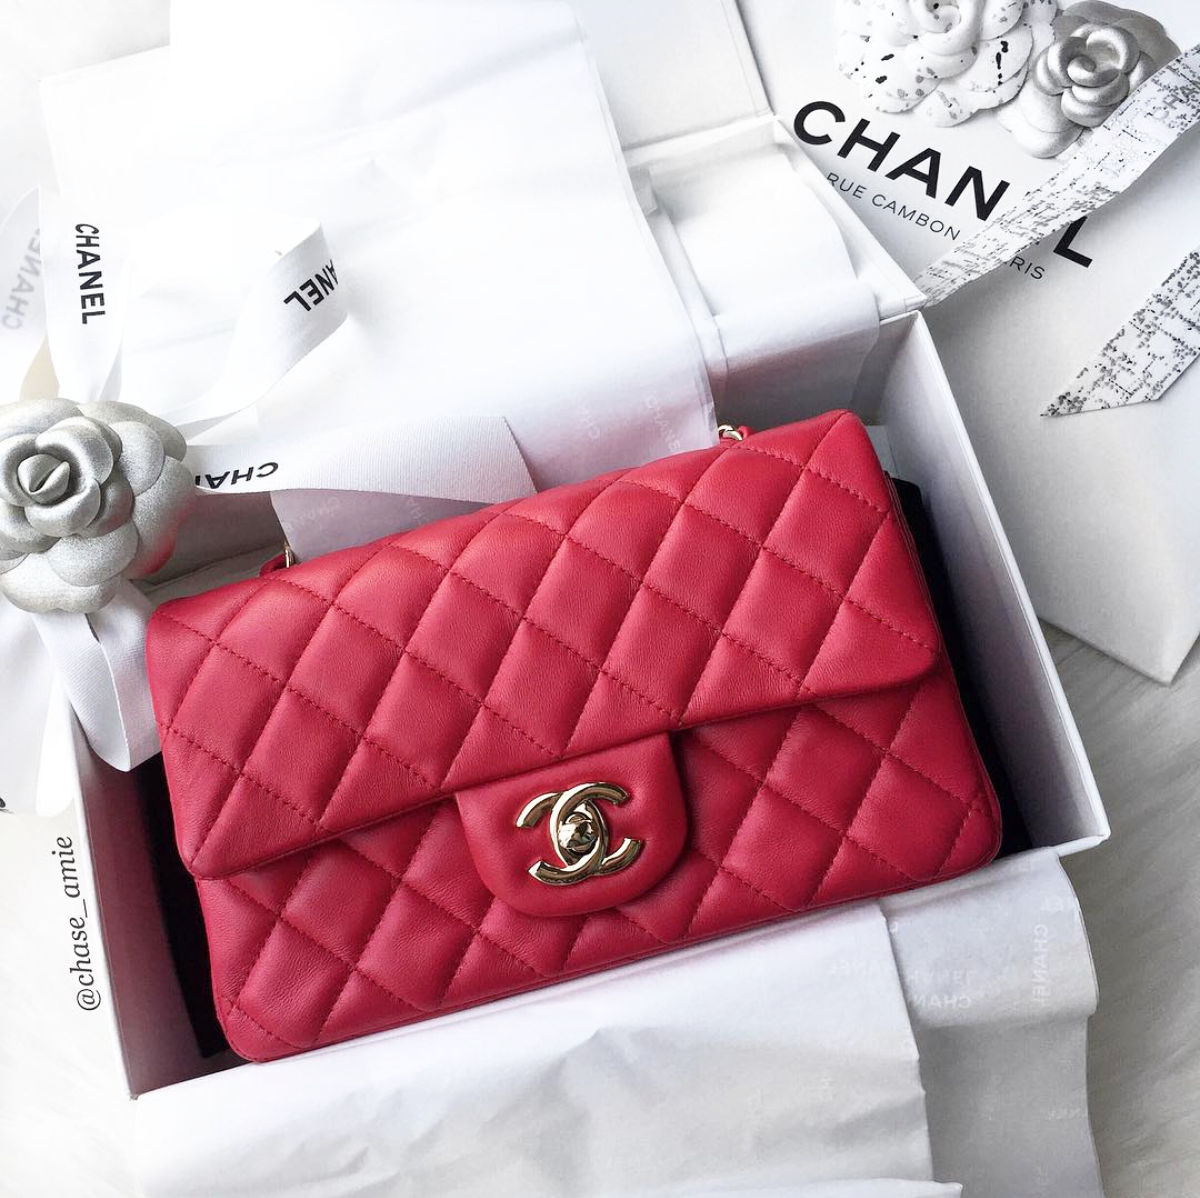 The Ultimate Chanel Classic Flap Guide - Chase Amie